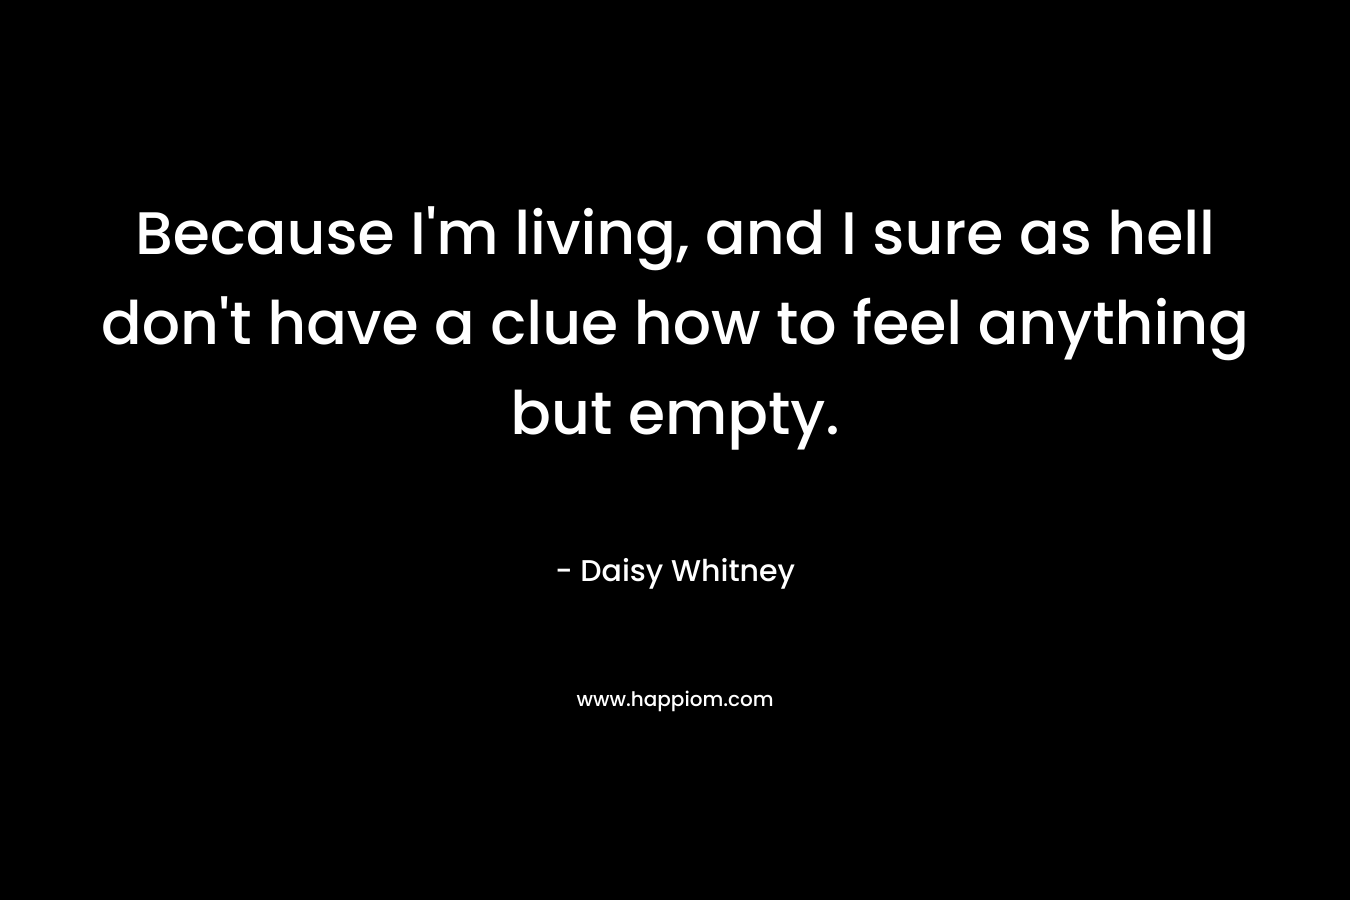 Because I'm living, and I sure as hell don't have a clue how to feel anything but empty.